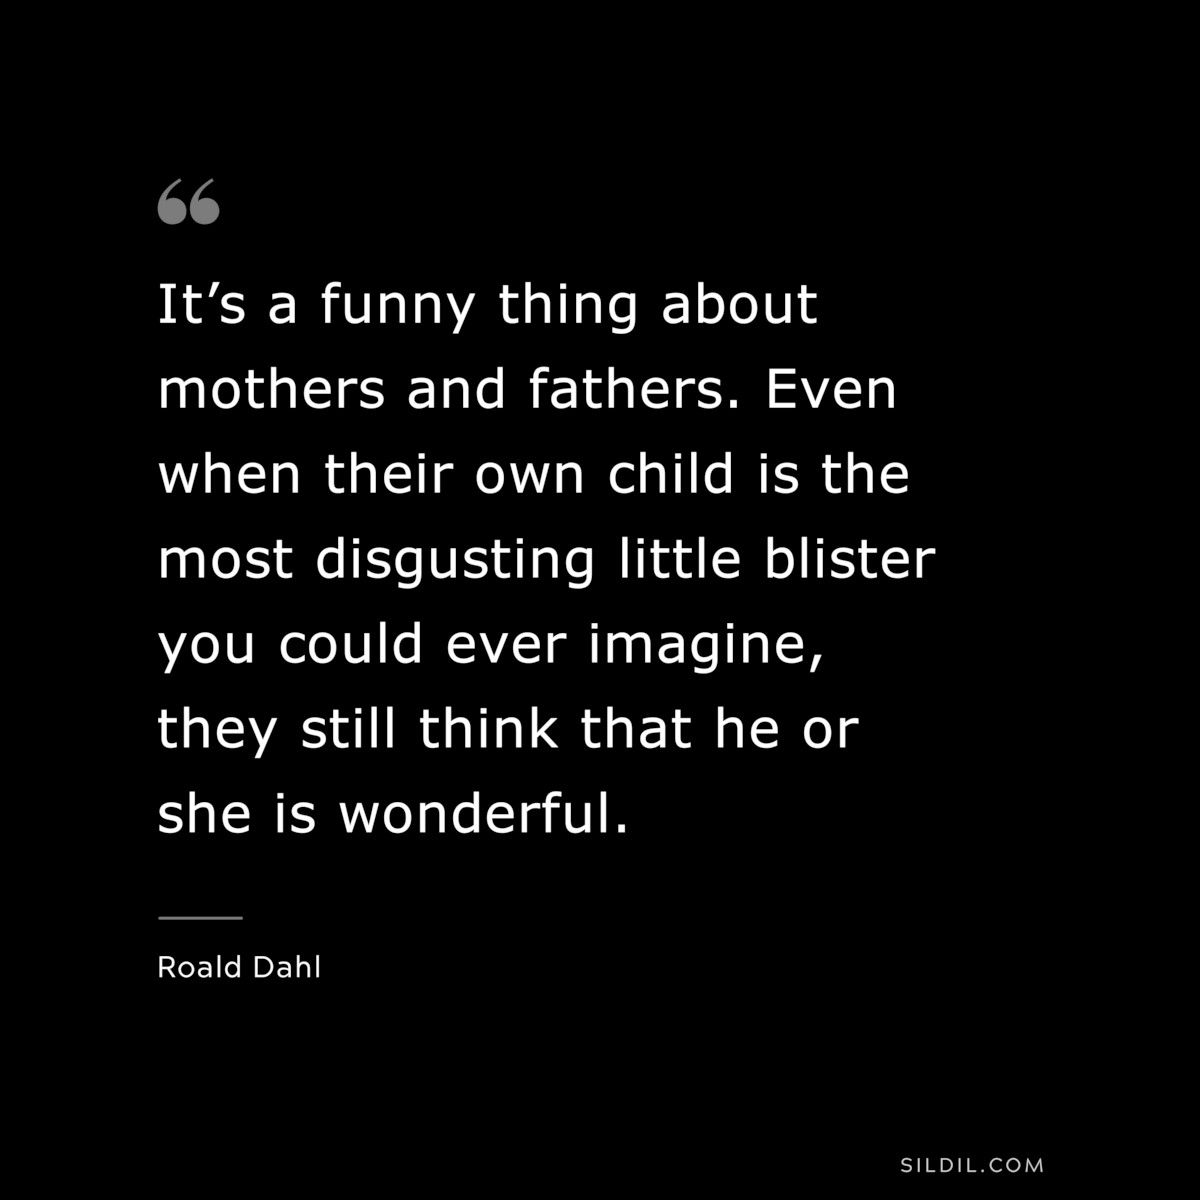 It’s a funny thing about mothers and fathers. Even when their own child is the most disgusting little blister you could ever imagine, they still think that he or she is wonderful. ― Roald Dahl